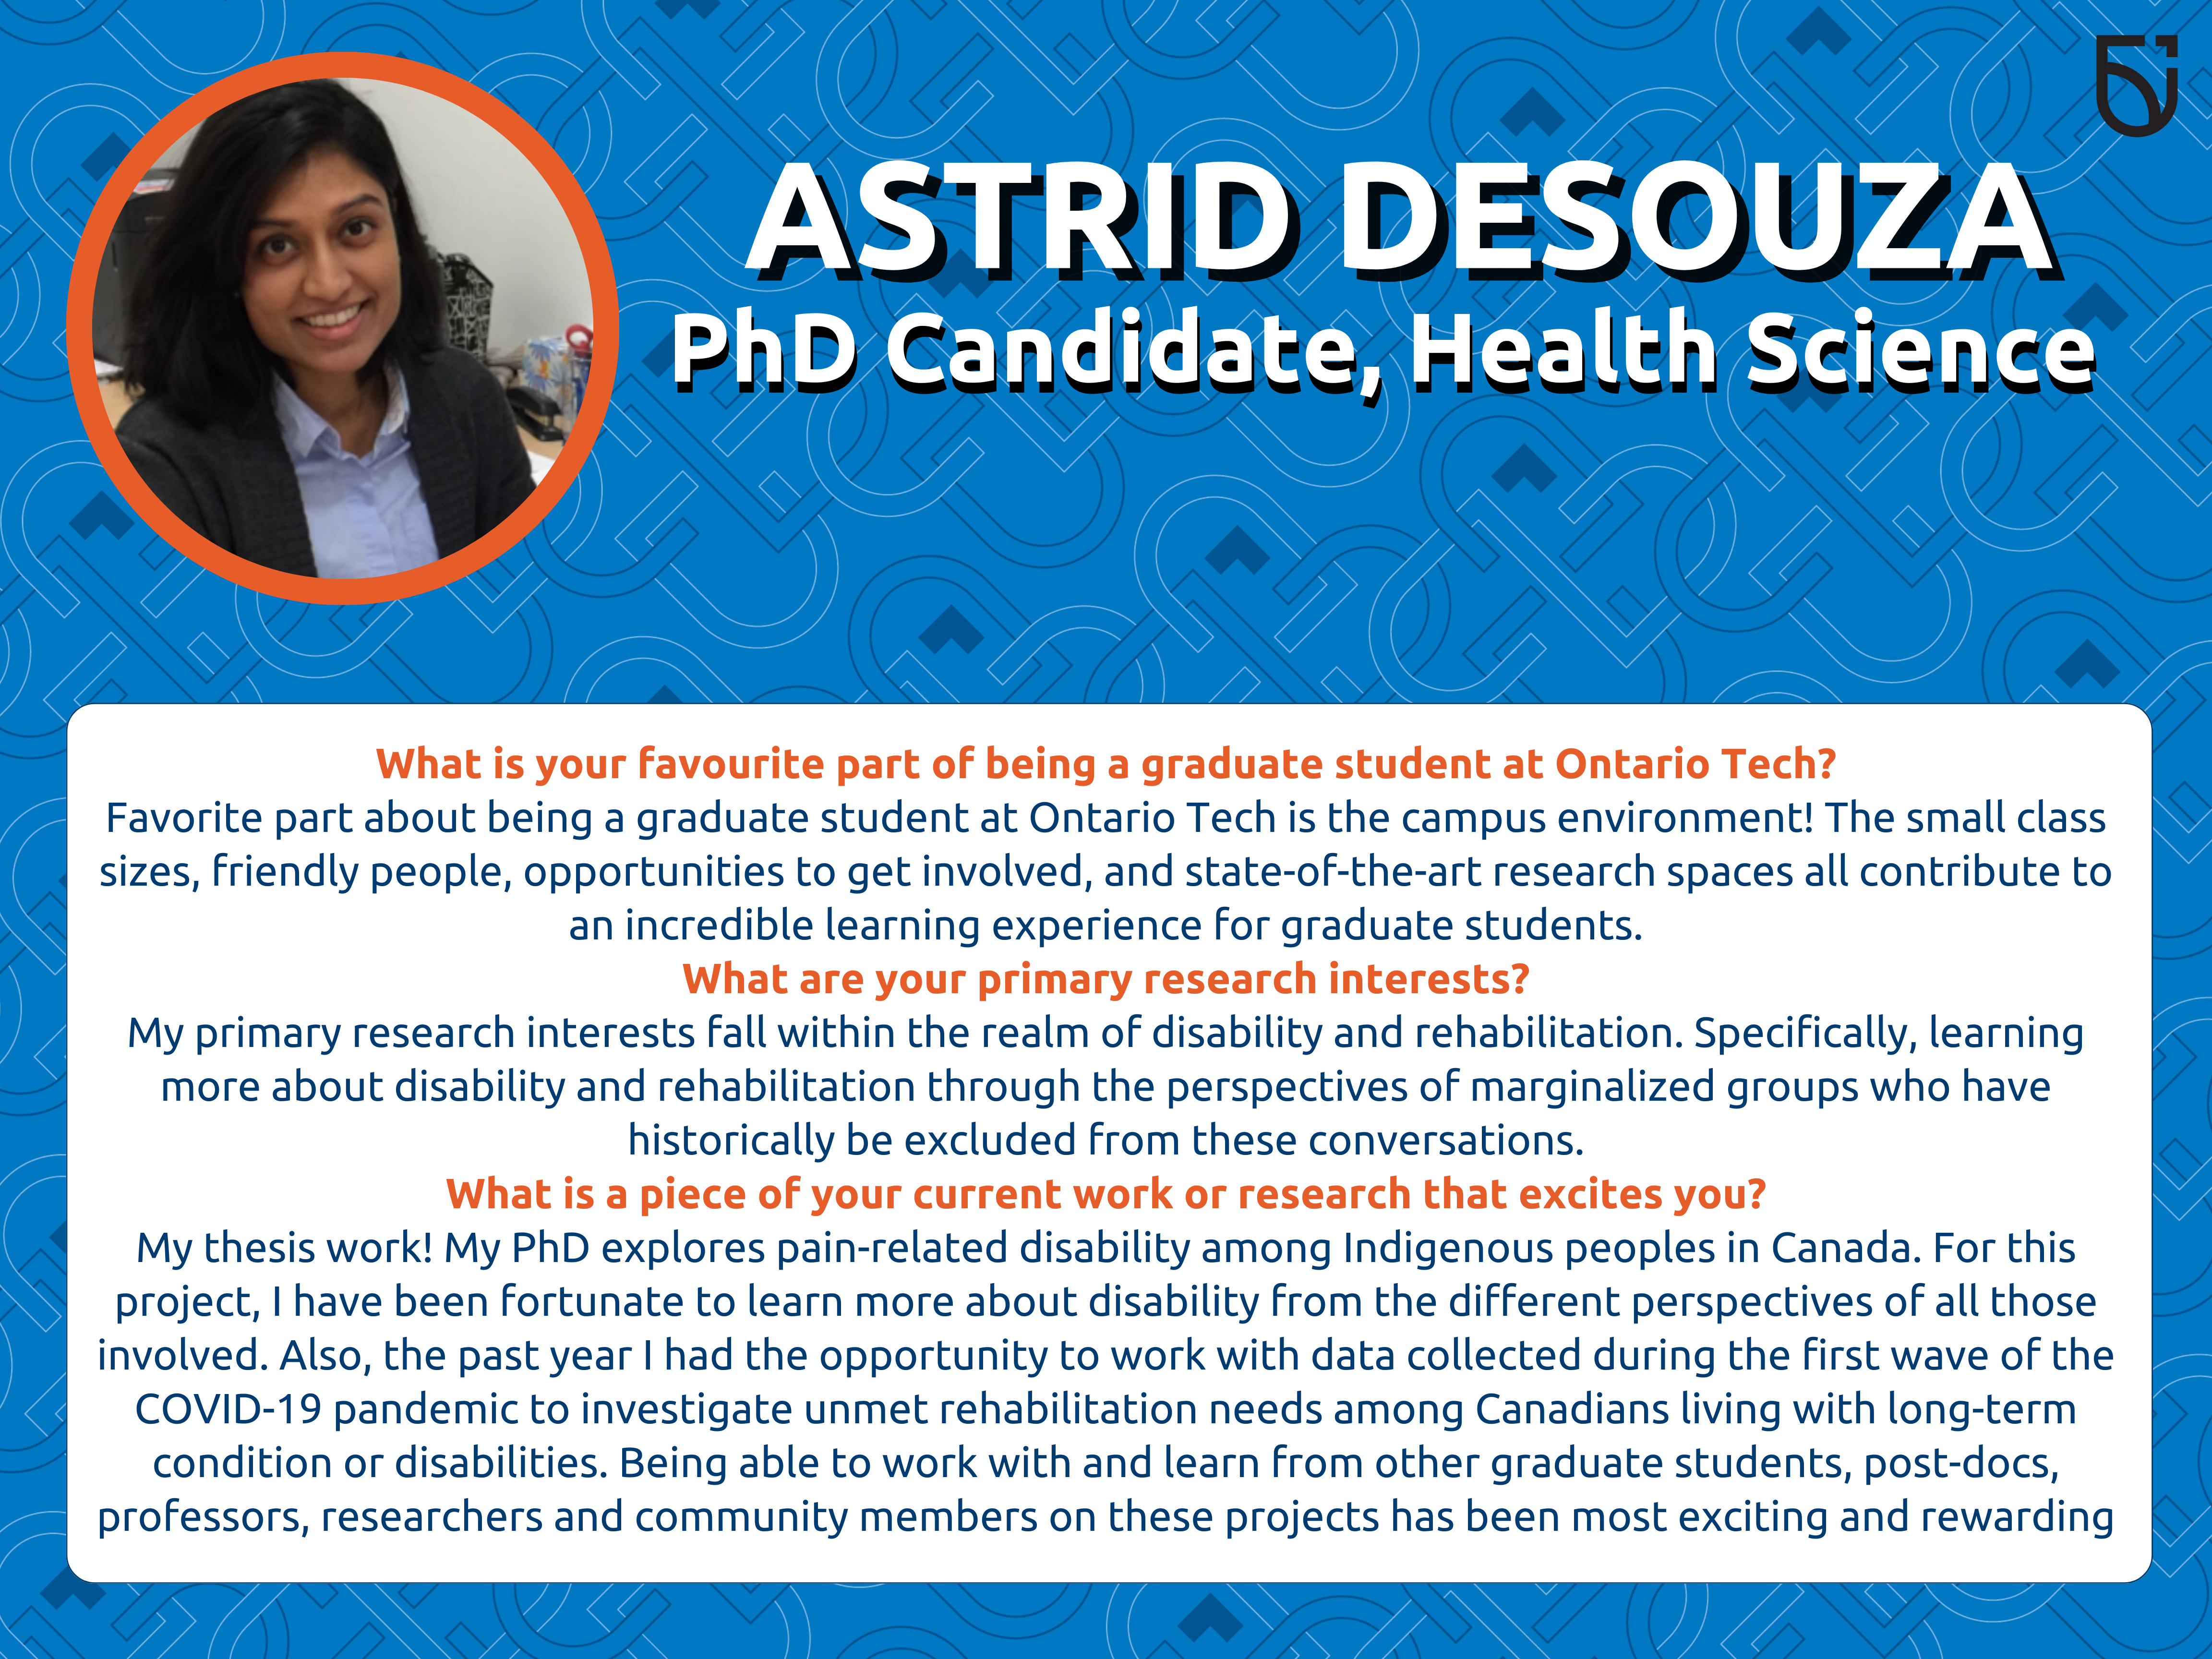 This photo is a Women’s Wednesday feature of Astrid DeSouza, a PhD Candidate in the Faculty of Health Sciences